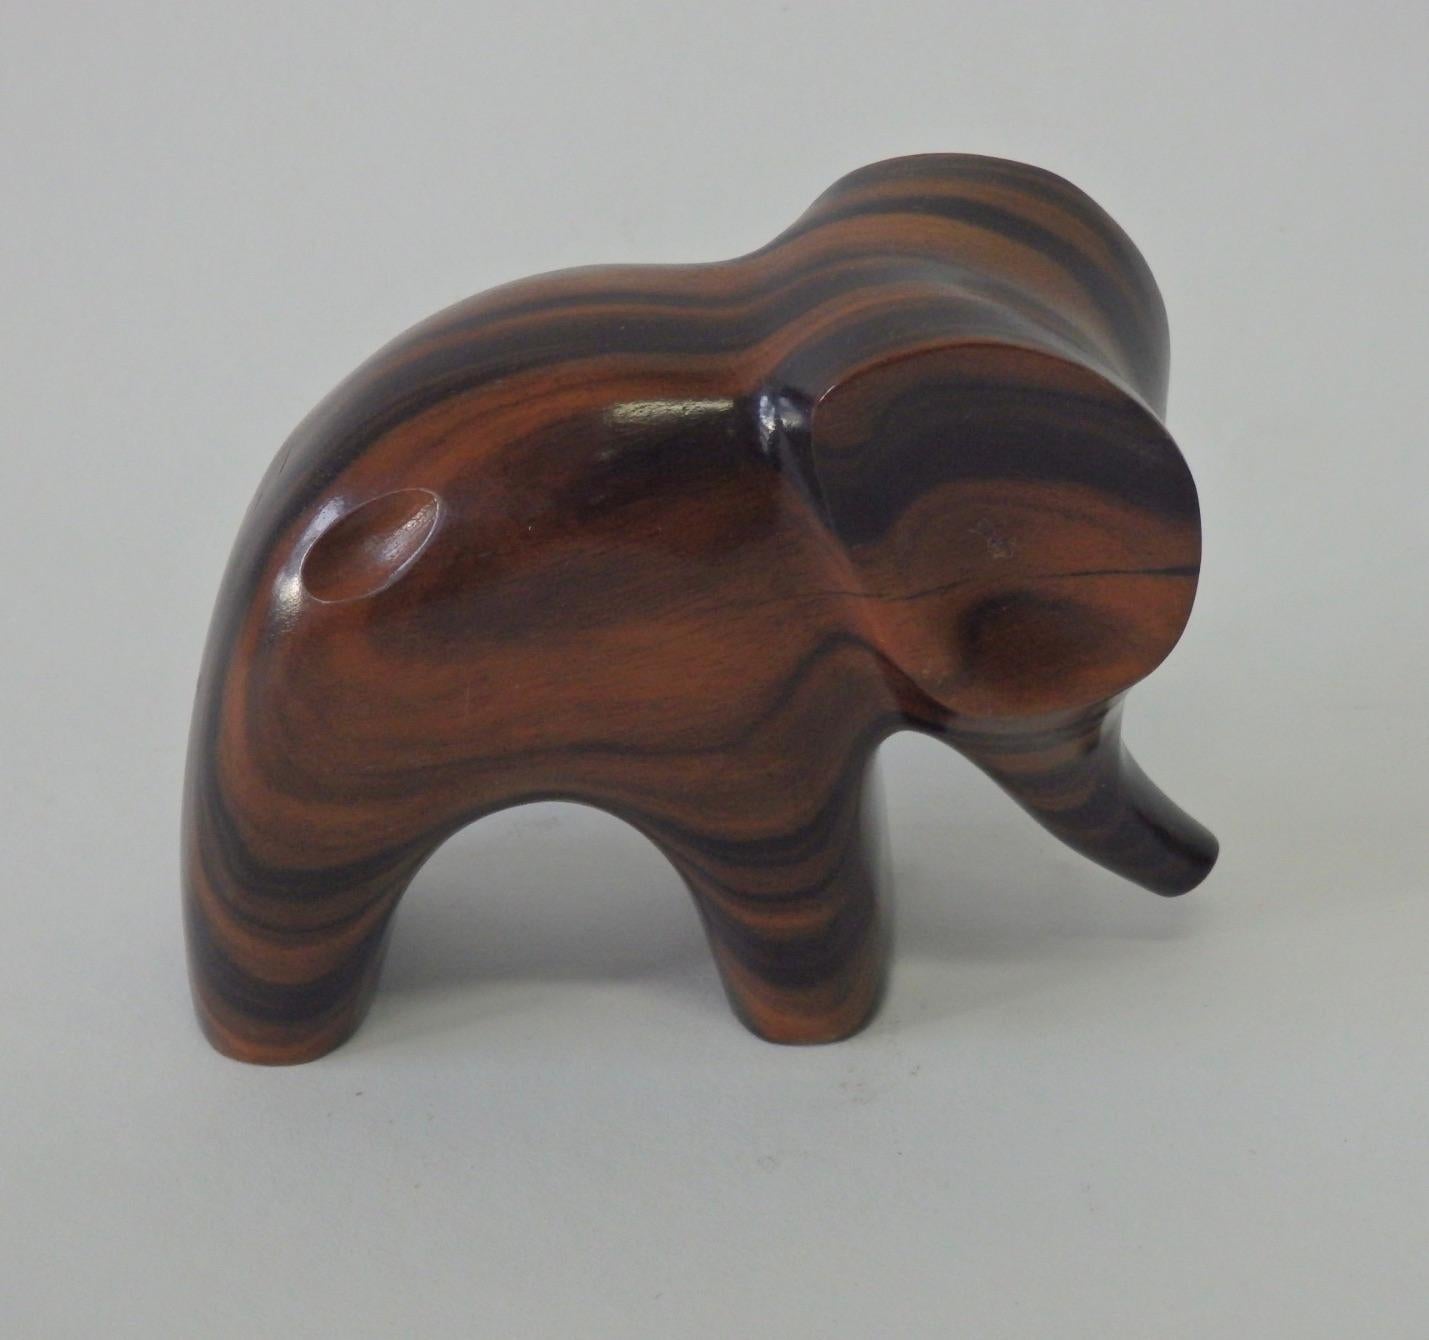 Nicely grained rosewood elephant sculpture beautifully executed polished to a high smooth shine.